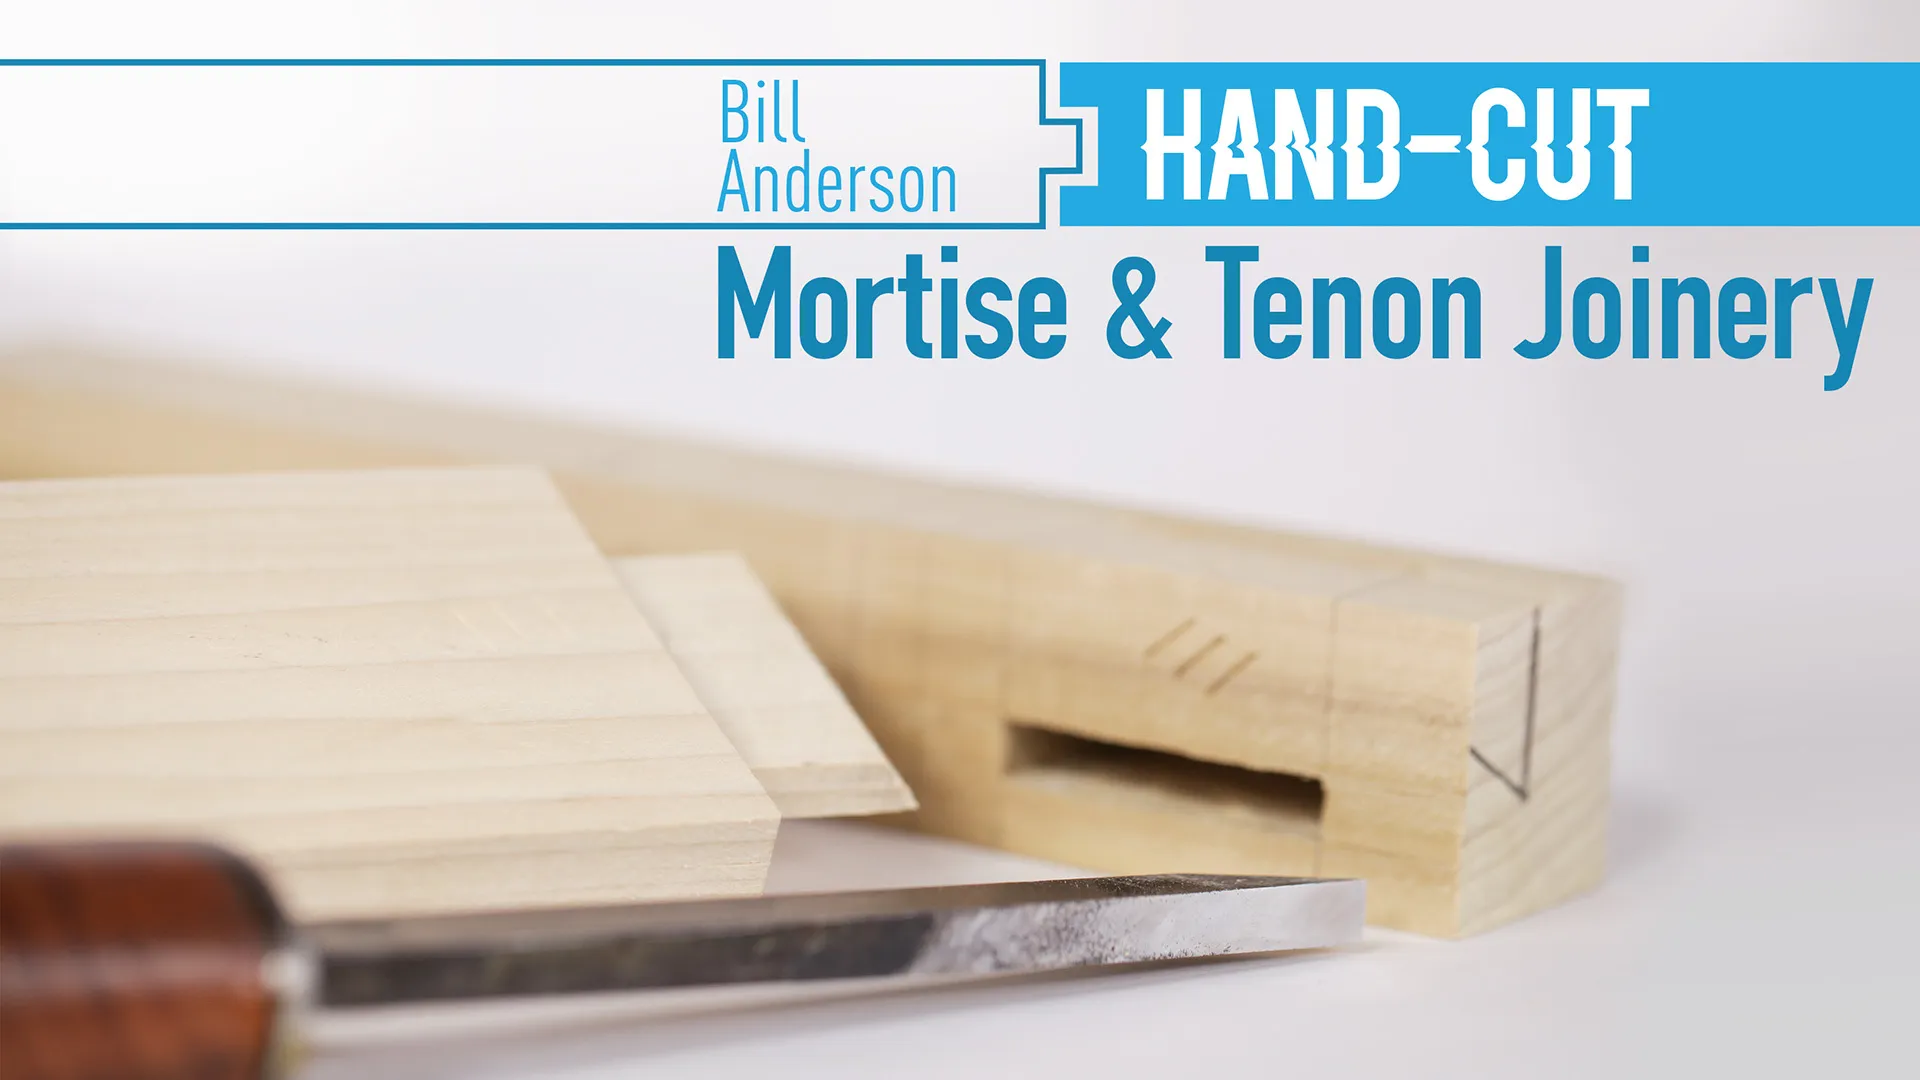 Hand-Cut Mortise & Tenon Joinery